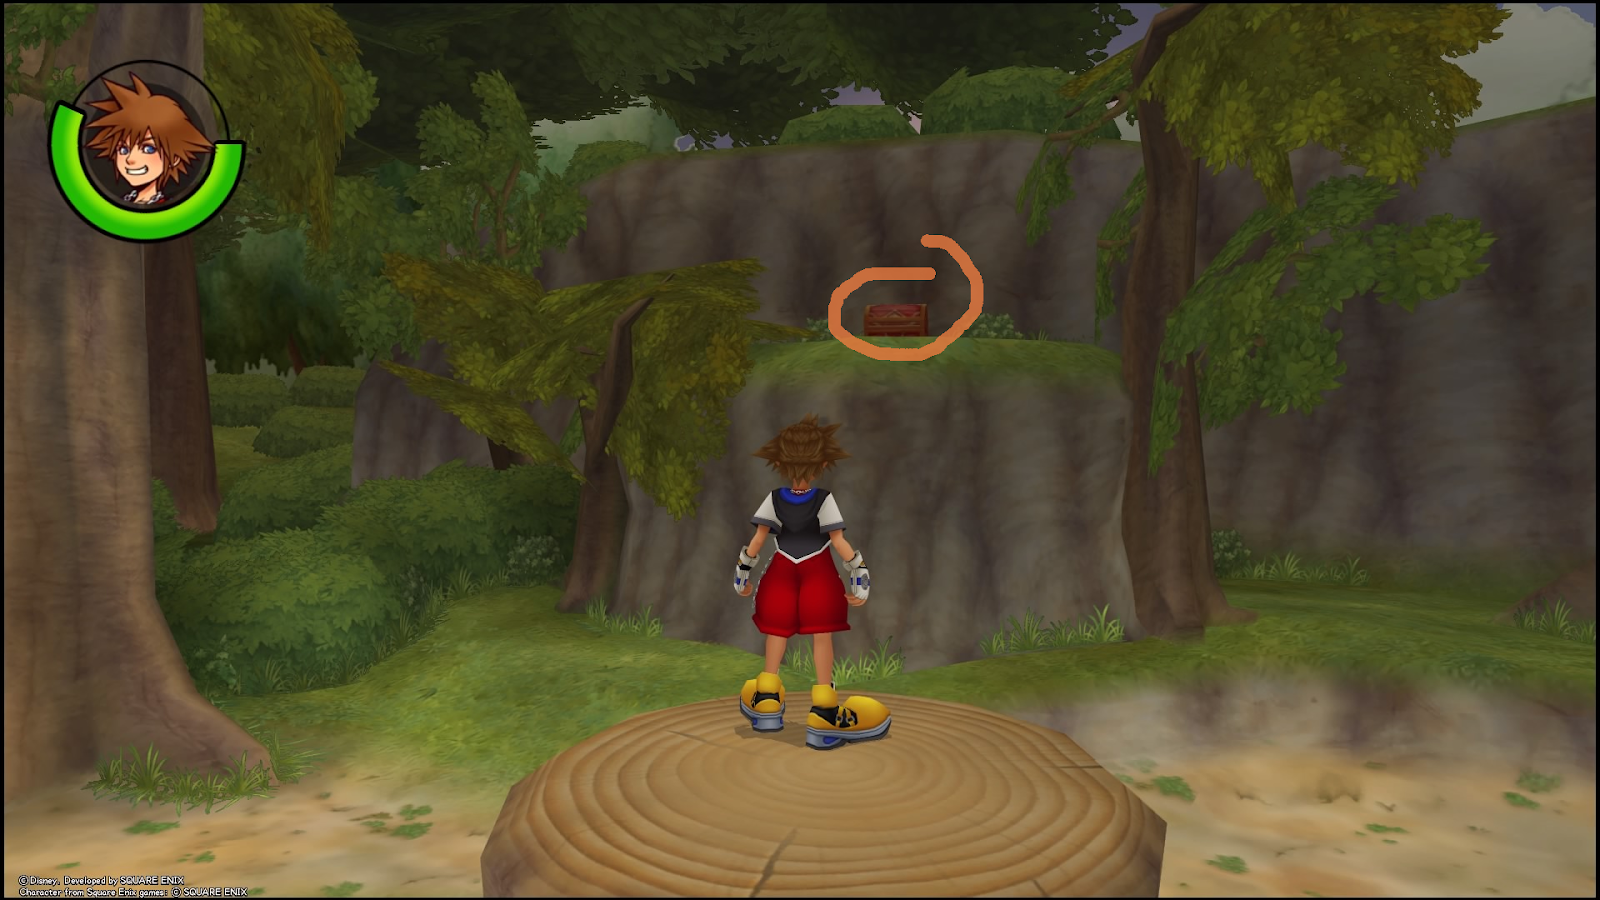 The Spellbinder chest, so close yet so far | Kingdom Hearts Re:Chain of Memories